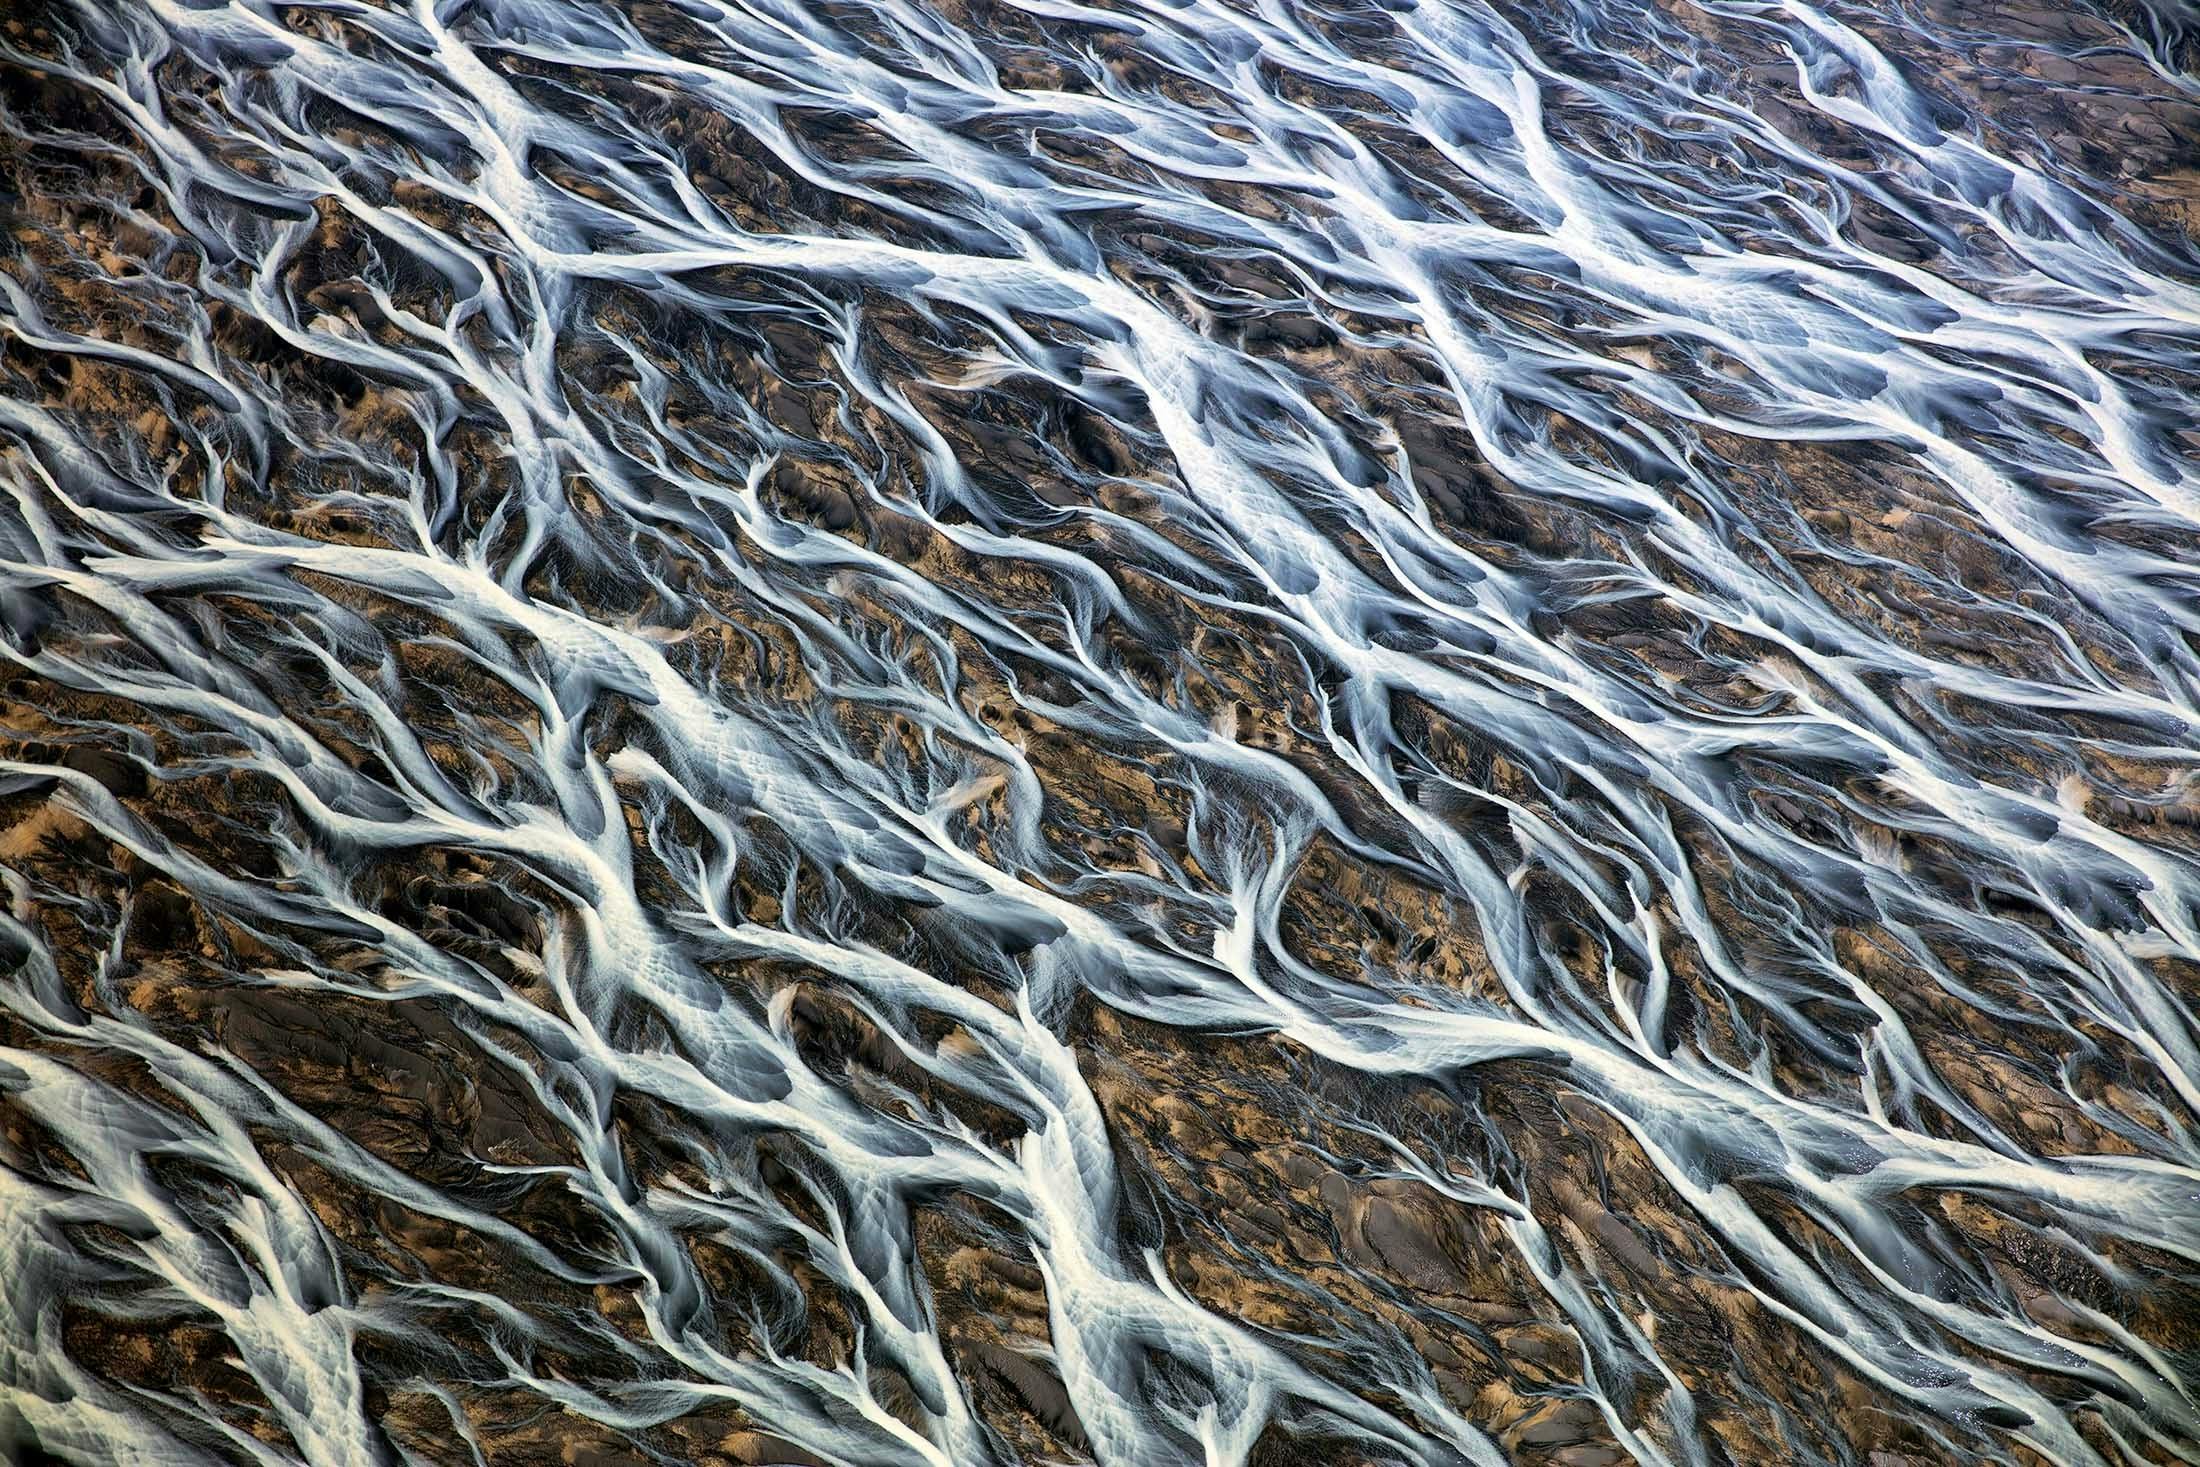 Iceland's Braided Rivers - Iceland travel